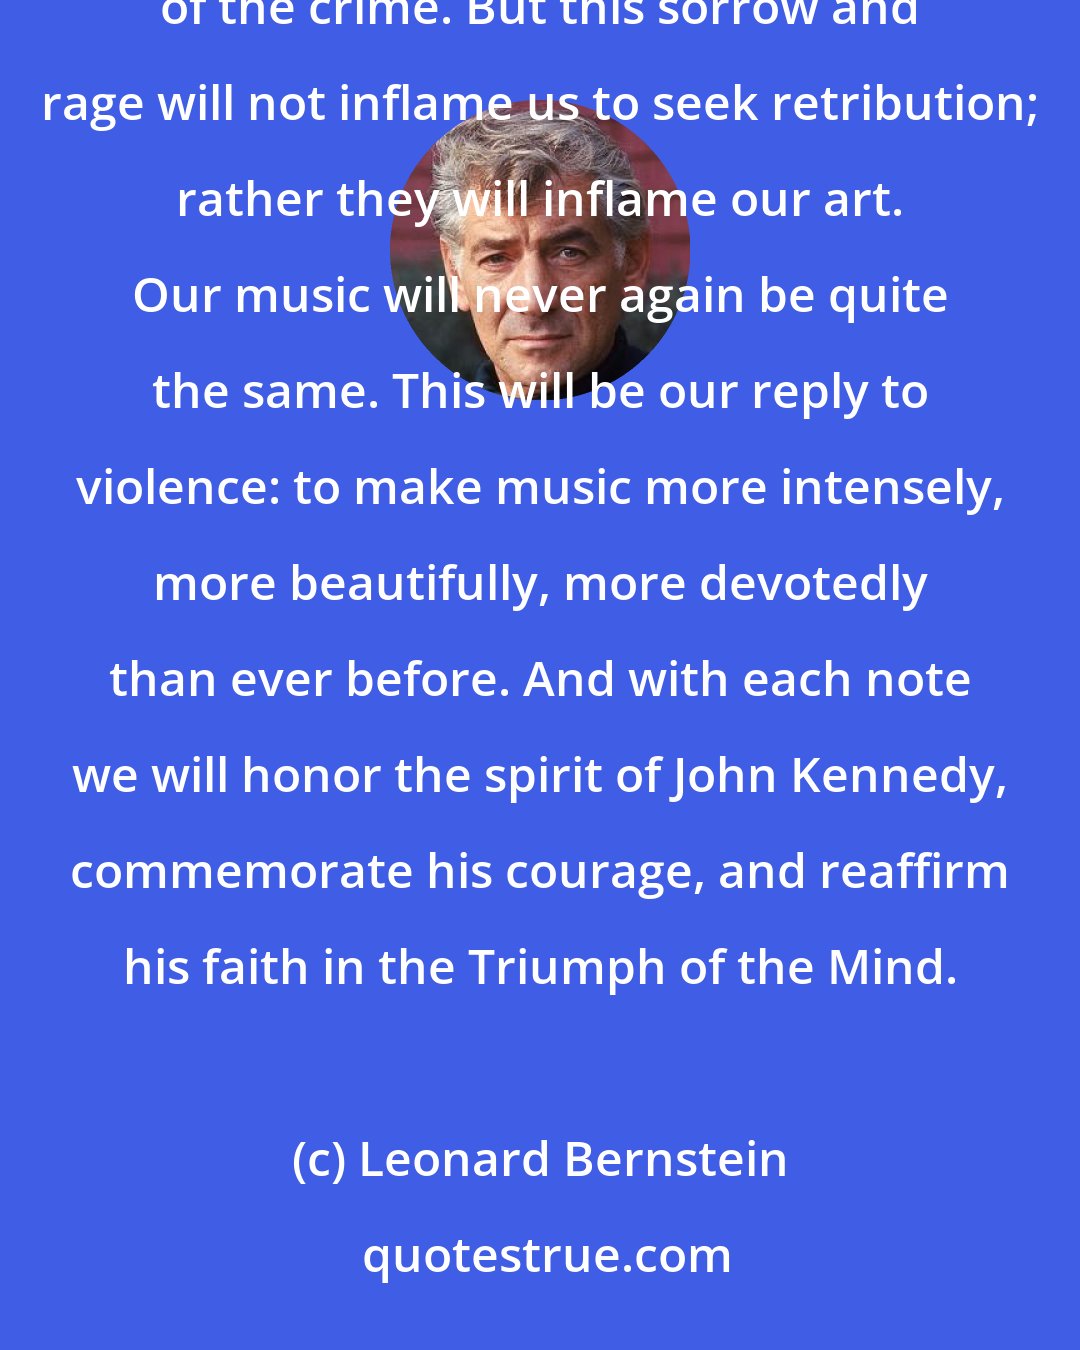 Leonard Bernstein: We musicians, like everyone else, are numb with sorrow at this murder, and with rage at the senselessness of the crime. But this sorrow and rage will not inflame us to seek retribution; rather they will inflame our art. Our music will never again be quite the same. This will be our reply to violence: to make music more intensely, more beautifully, more devotedly than ever before. And with each note we will honor the spirit of John Kennedy, commemorate his courage, and reaffirm his faith in the Triumph of the Mind.